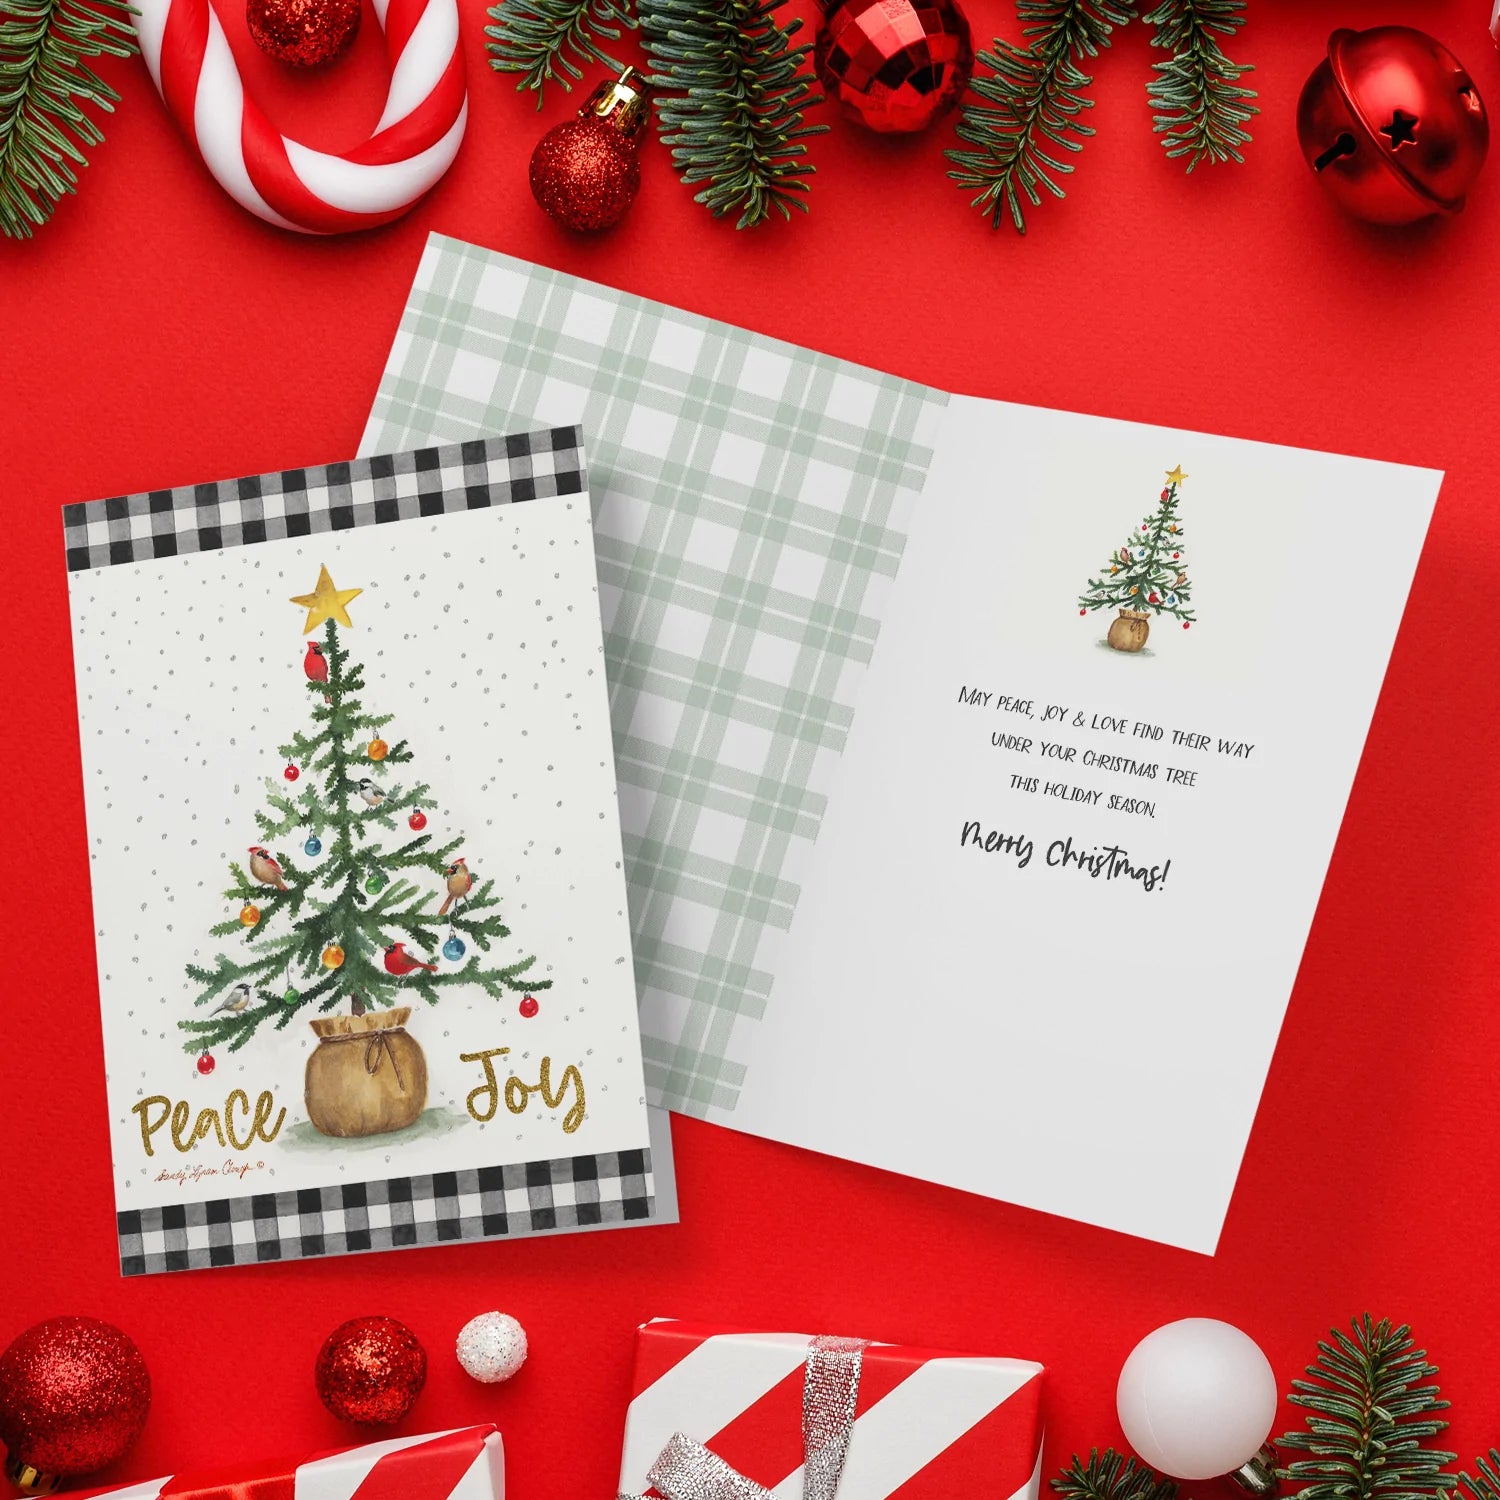 3 of 3: Peace and Joy by Sandy Clough: Christmas Cards (Lifestyle)